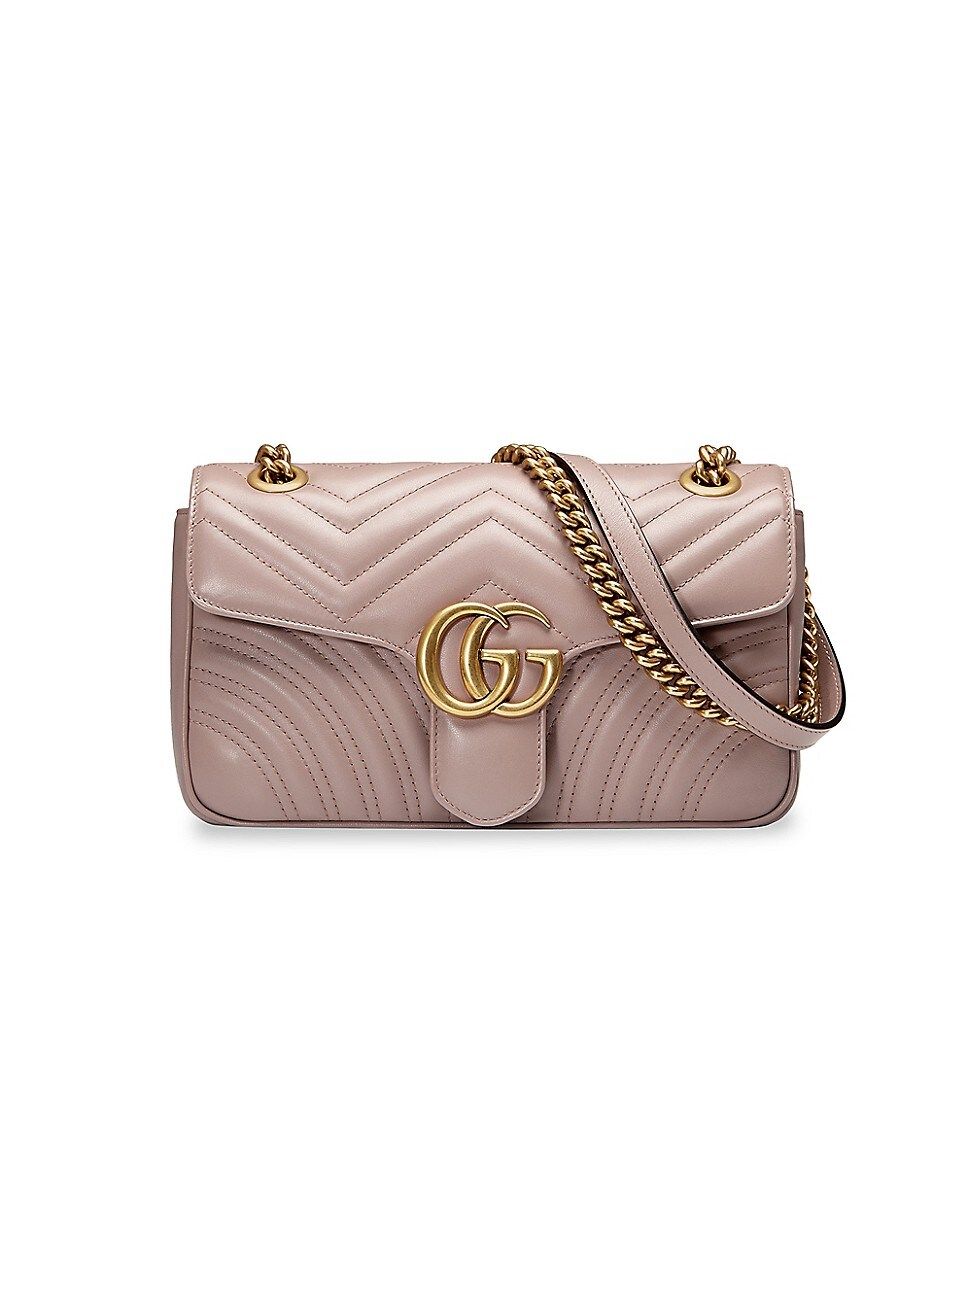 Gucci GG Marmont Small Shoulder Bag | Saks Fifth Avenue